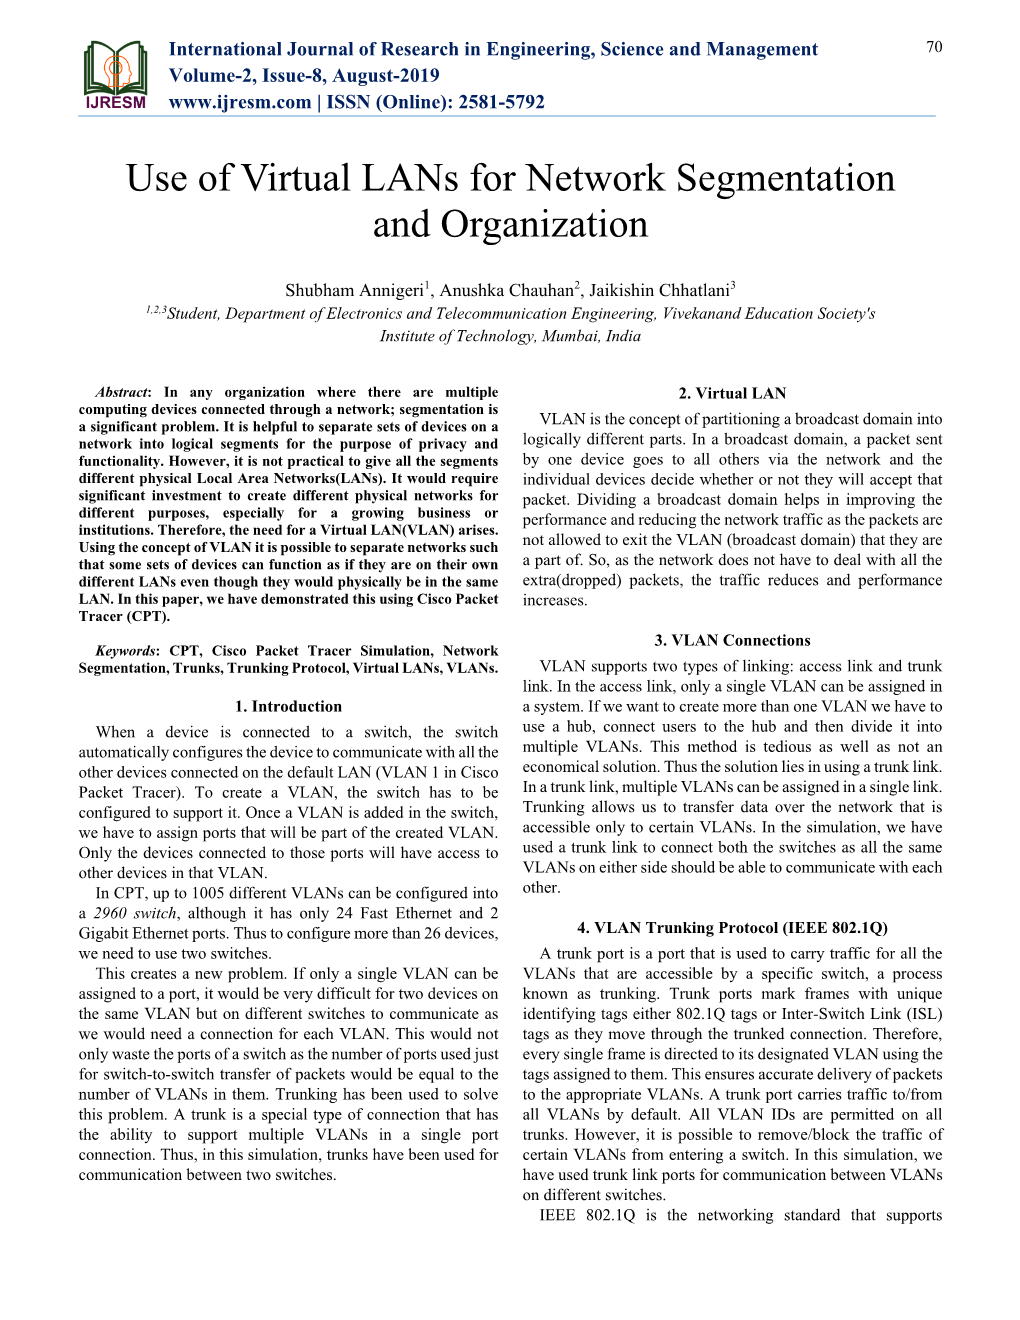 Use of Virtual Lans for Network Segmentation and Organization